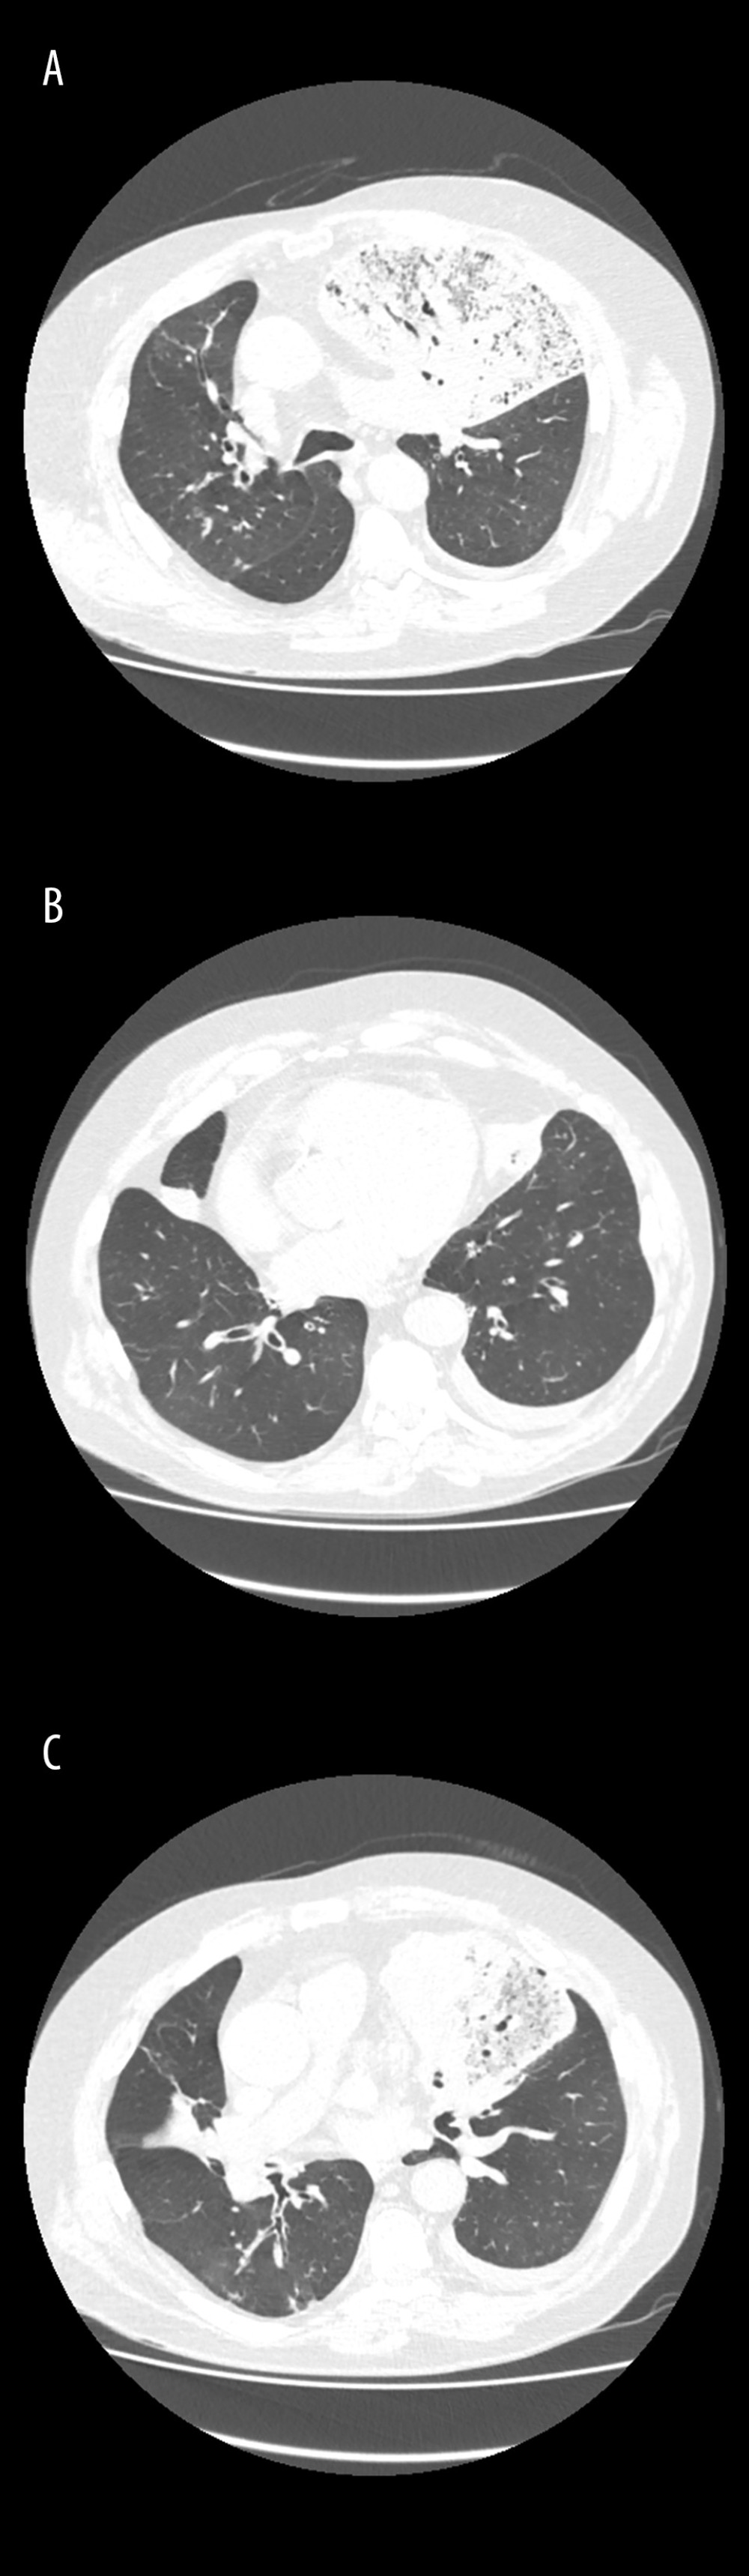 (A–C) Chest computed tomography of patient showing large left upper lobe pneumonia and bronchiectasis in lover lobes.